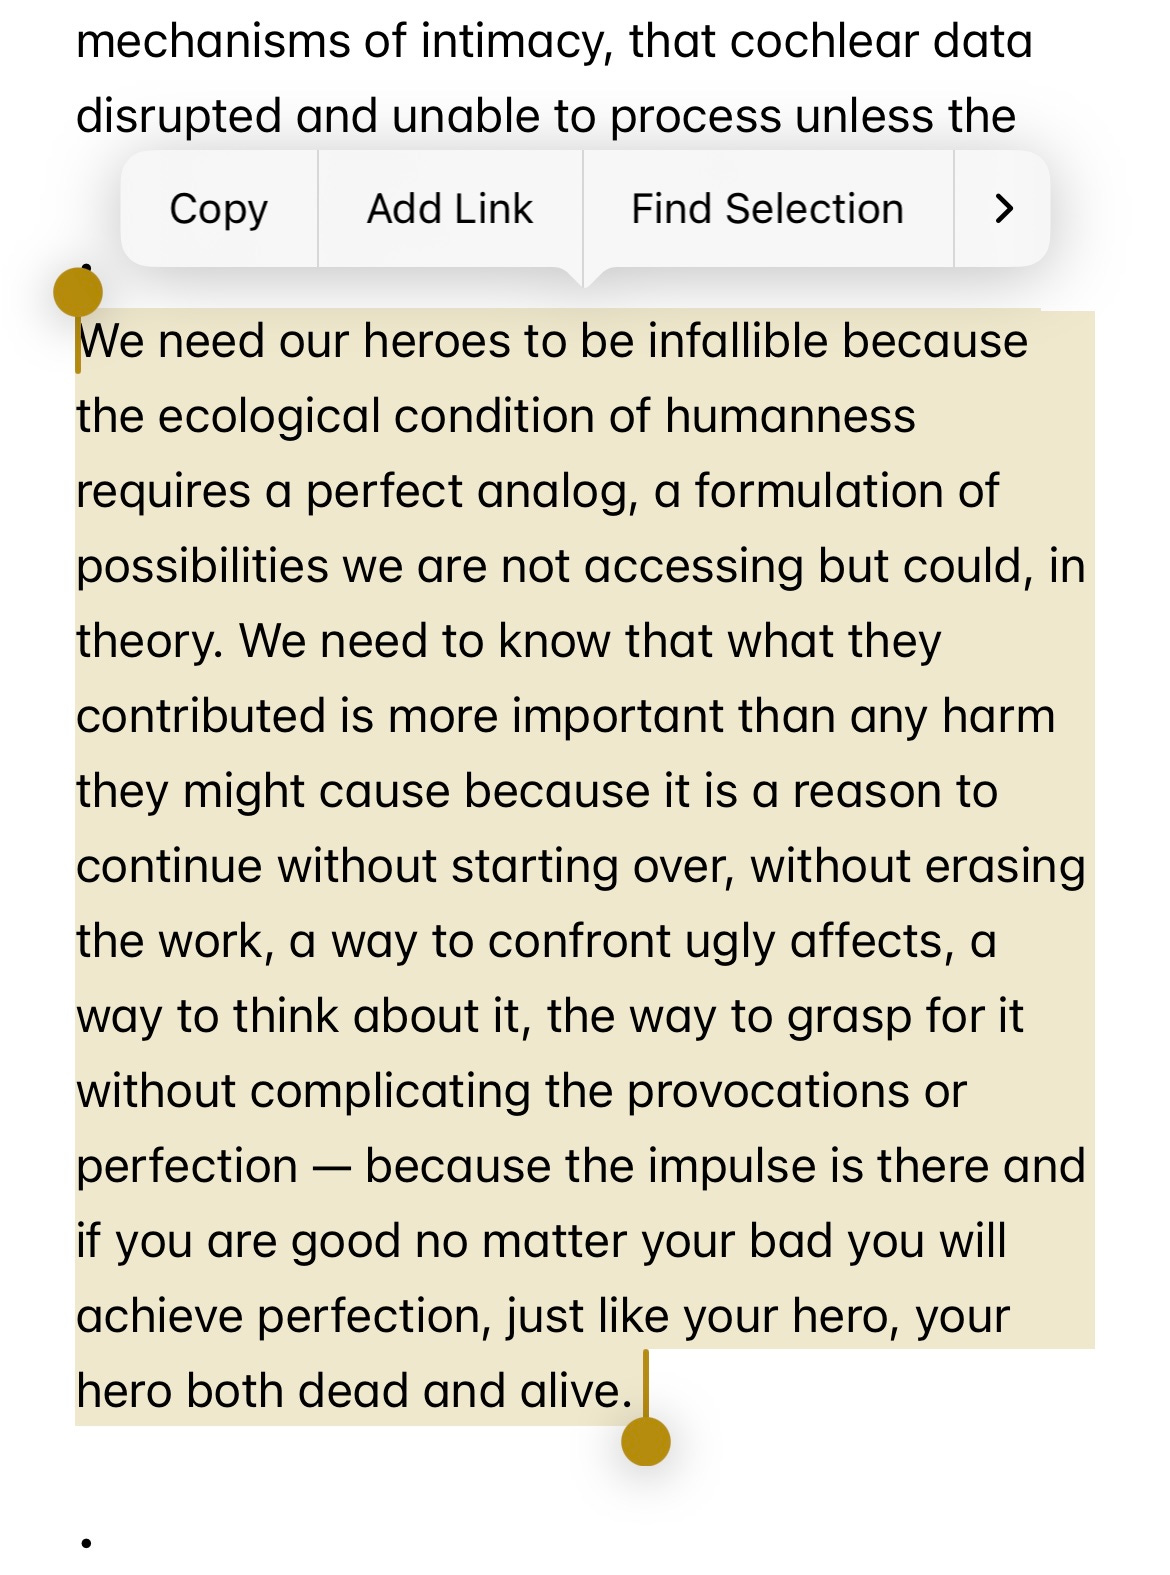 Screenshot of notes app on iPhone of black letters that say: We need our heroes to be infallible because the ecological condition of humanness requires a perfect analog, a formulation of possibilities we are not accessing but could, in theory. We need to know that what they contributed is more important than any harm they might cause because it is a reason to continue without starting over, without erasing the work, a way to confront ugly affects, a way to think about it, the way to grasp for it without complicating the provocations or perfection — because the impulse is there and if you are good no matter your bad you will achieve perfection, just like your hero, your hero both dead and alive. 